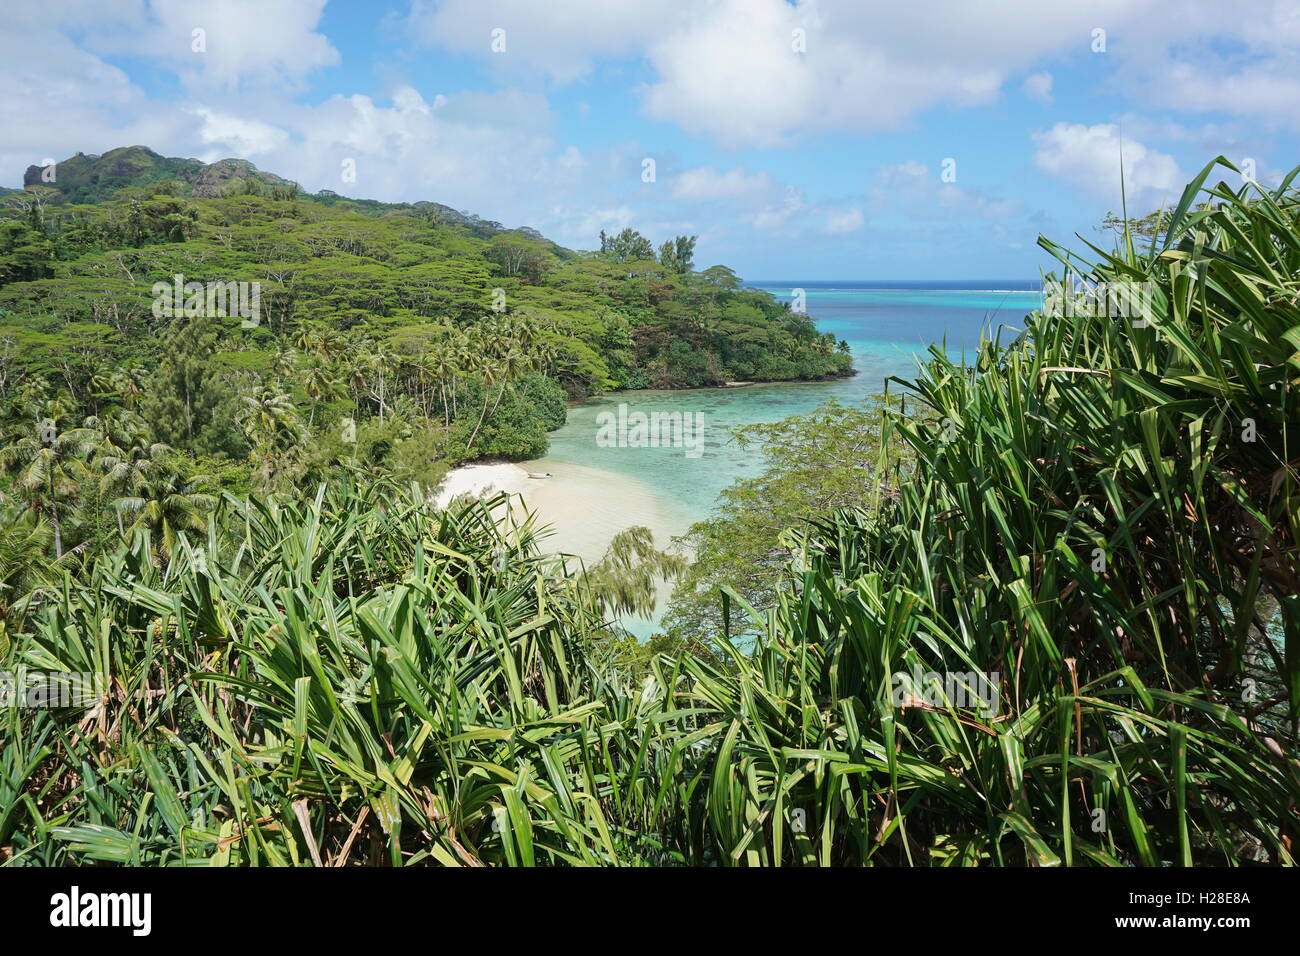 A secluded sandy beach with lush tropical vegetation, Huahine island, Pacific ocean, French Polynesia Stock Photo